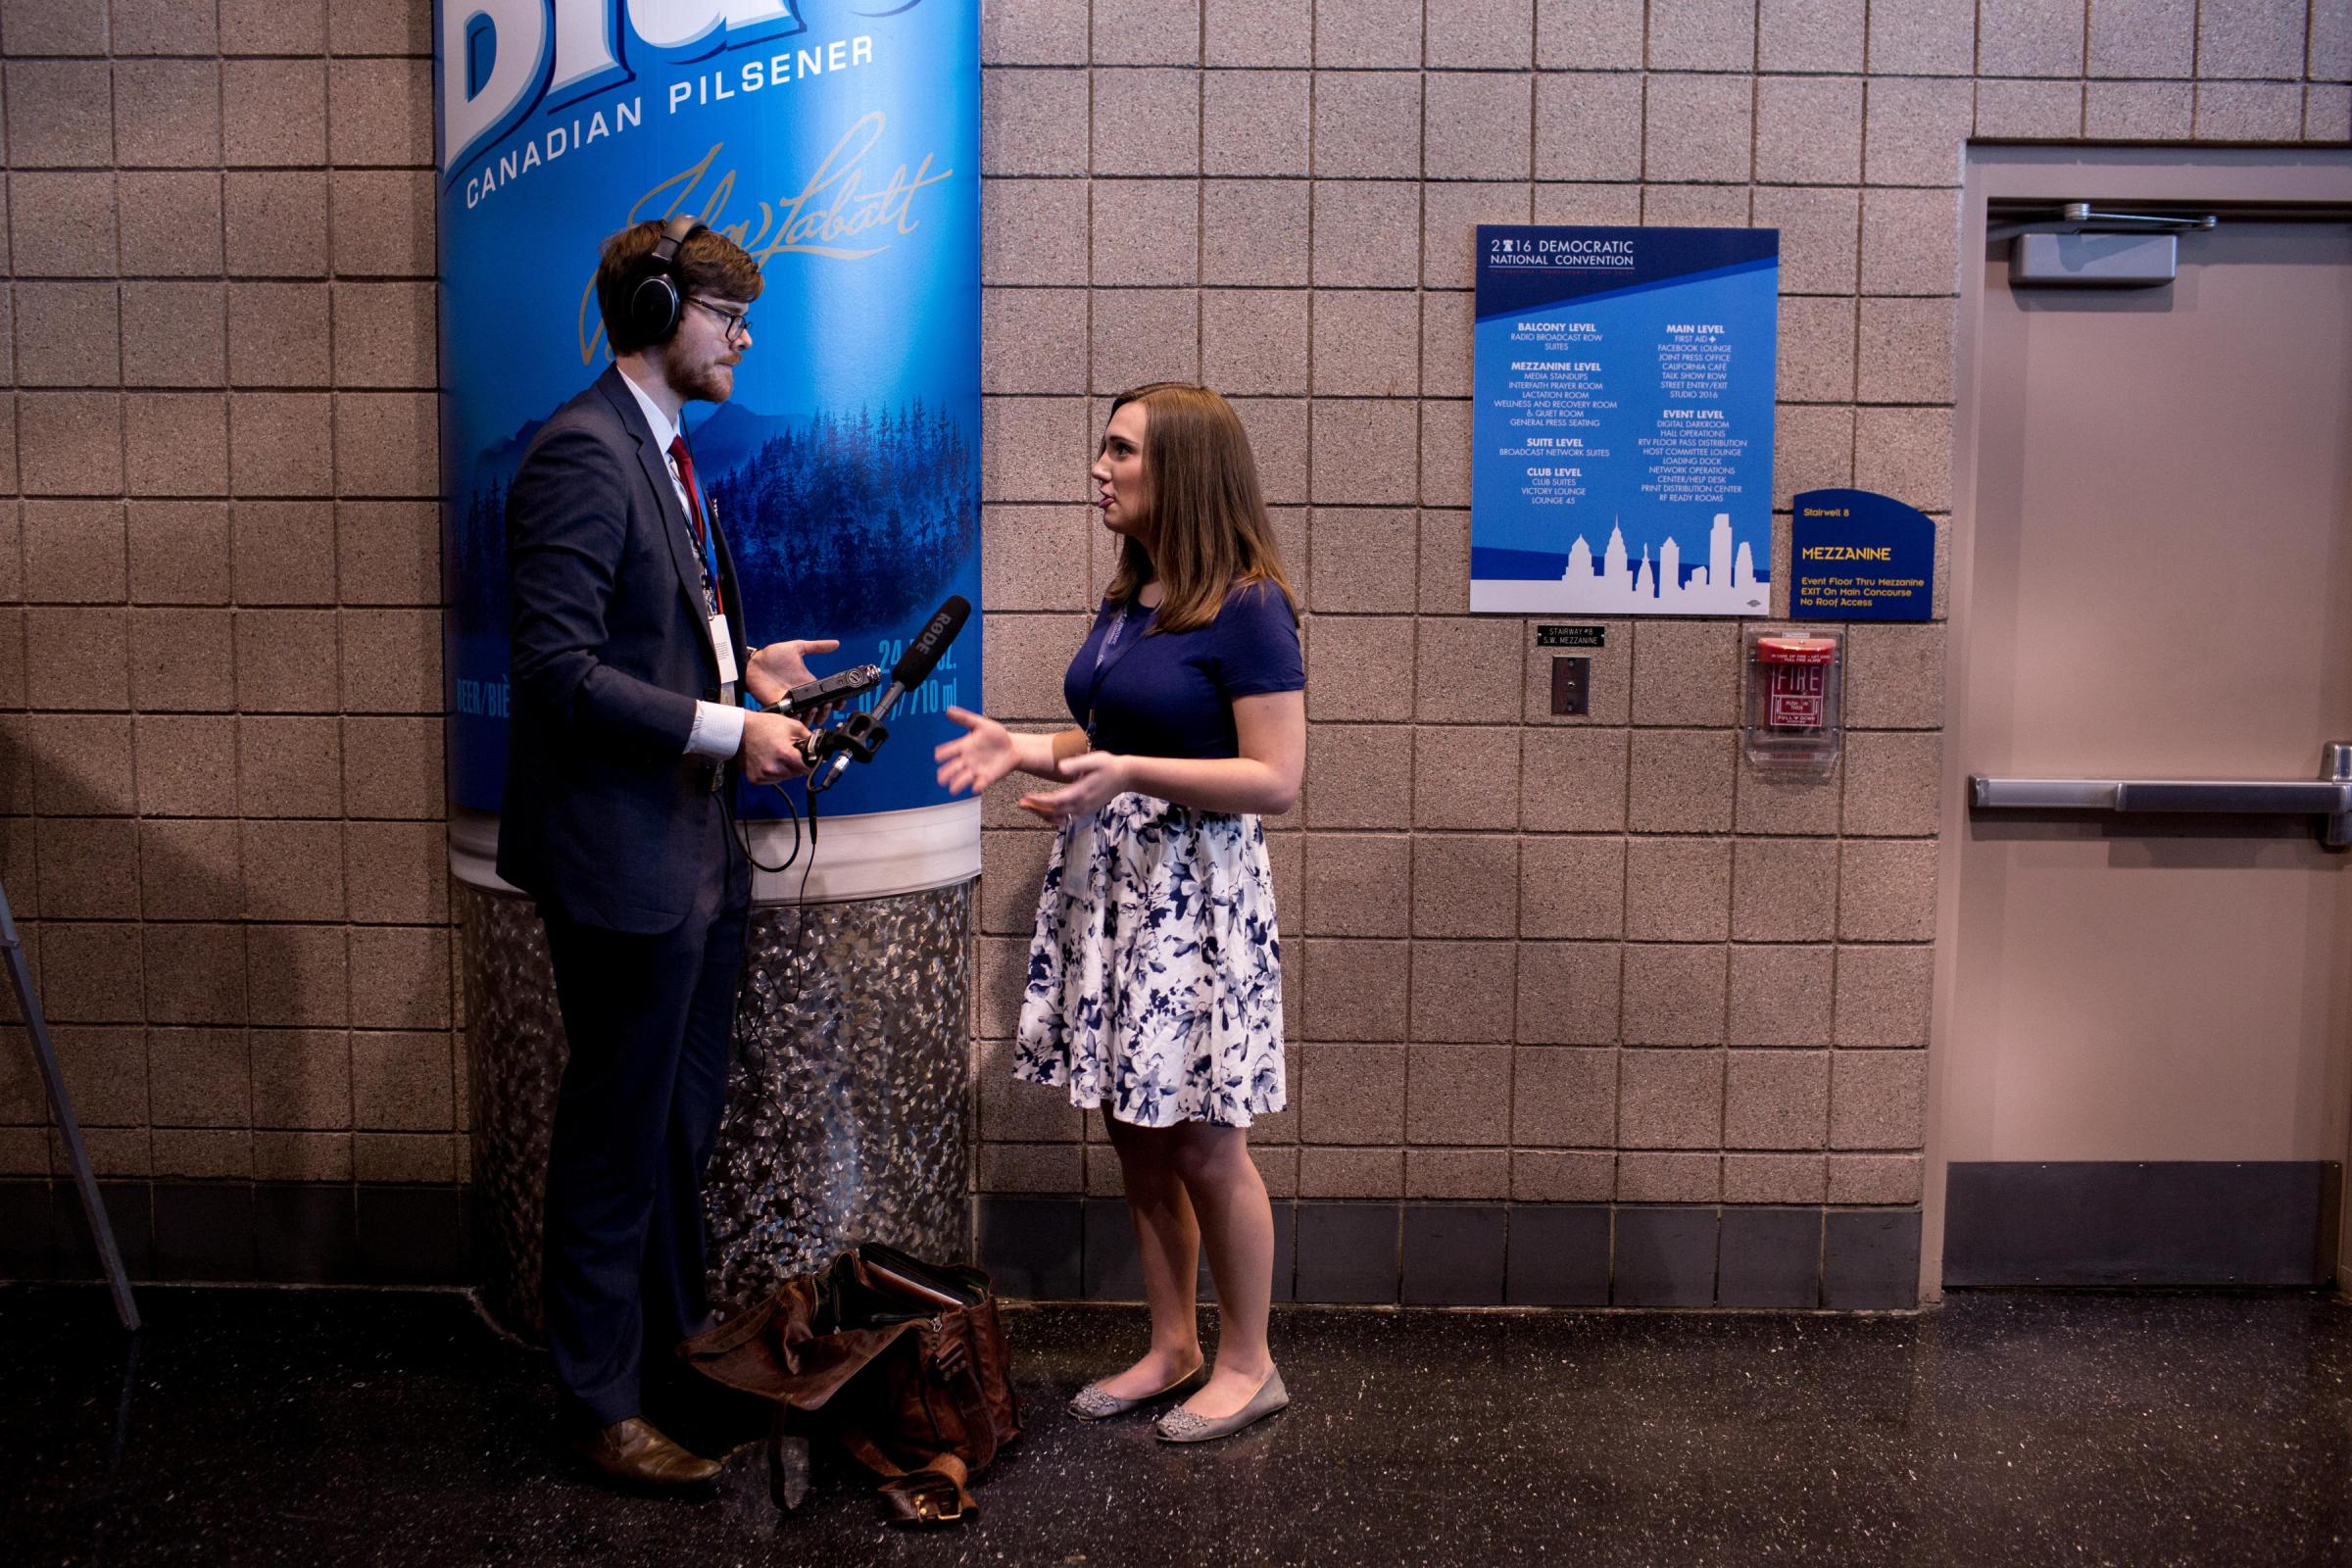 Sarah McBride is interviewed by a radio journalist at the Wells Fargo Center where she is attending Democratic National Convention on July 25, 2016 in Philadelphia.(Natalie Keyssar for TIME)